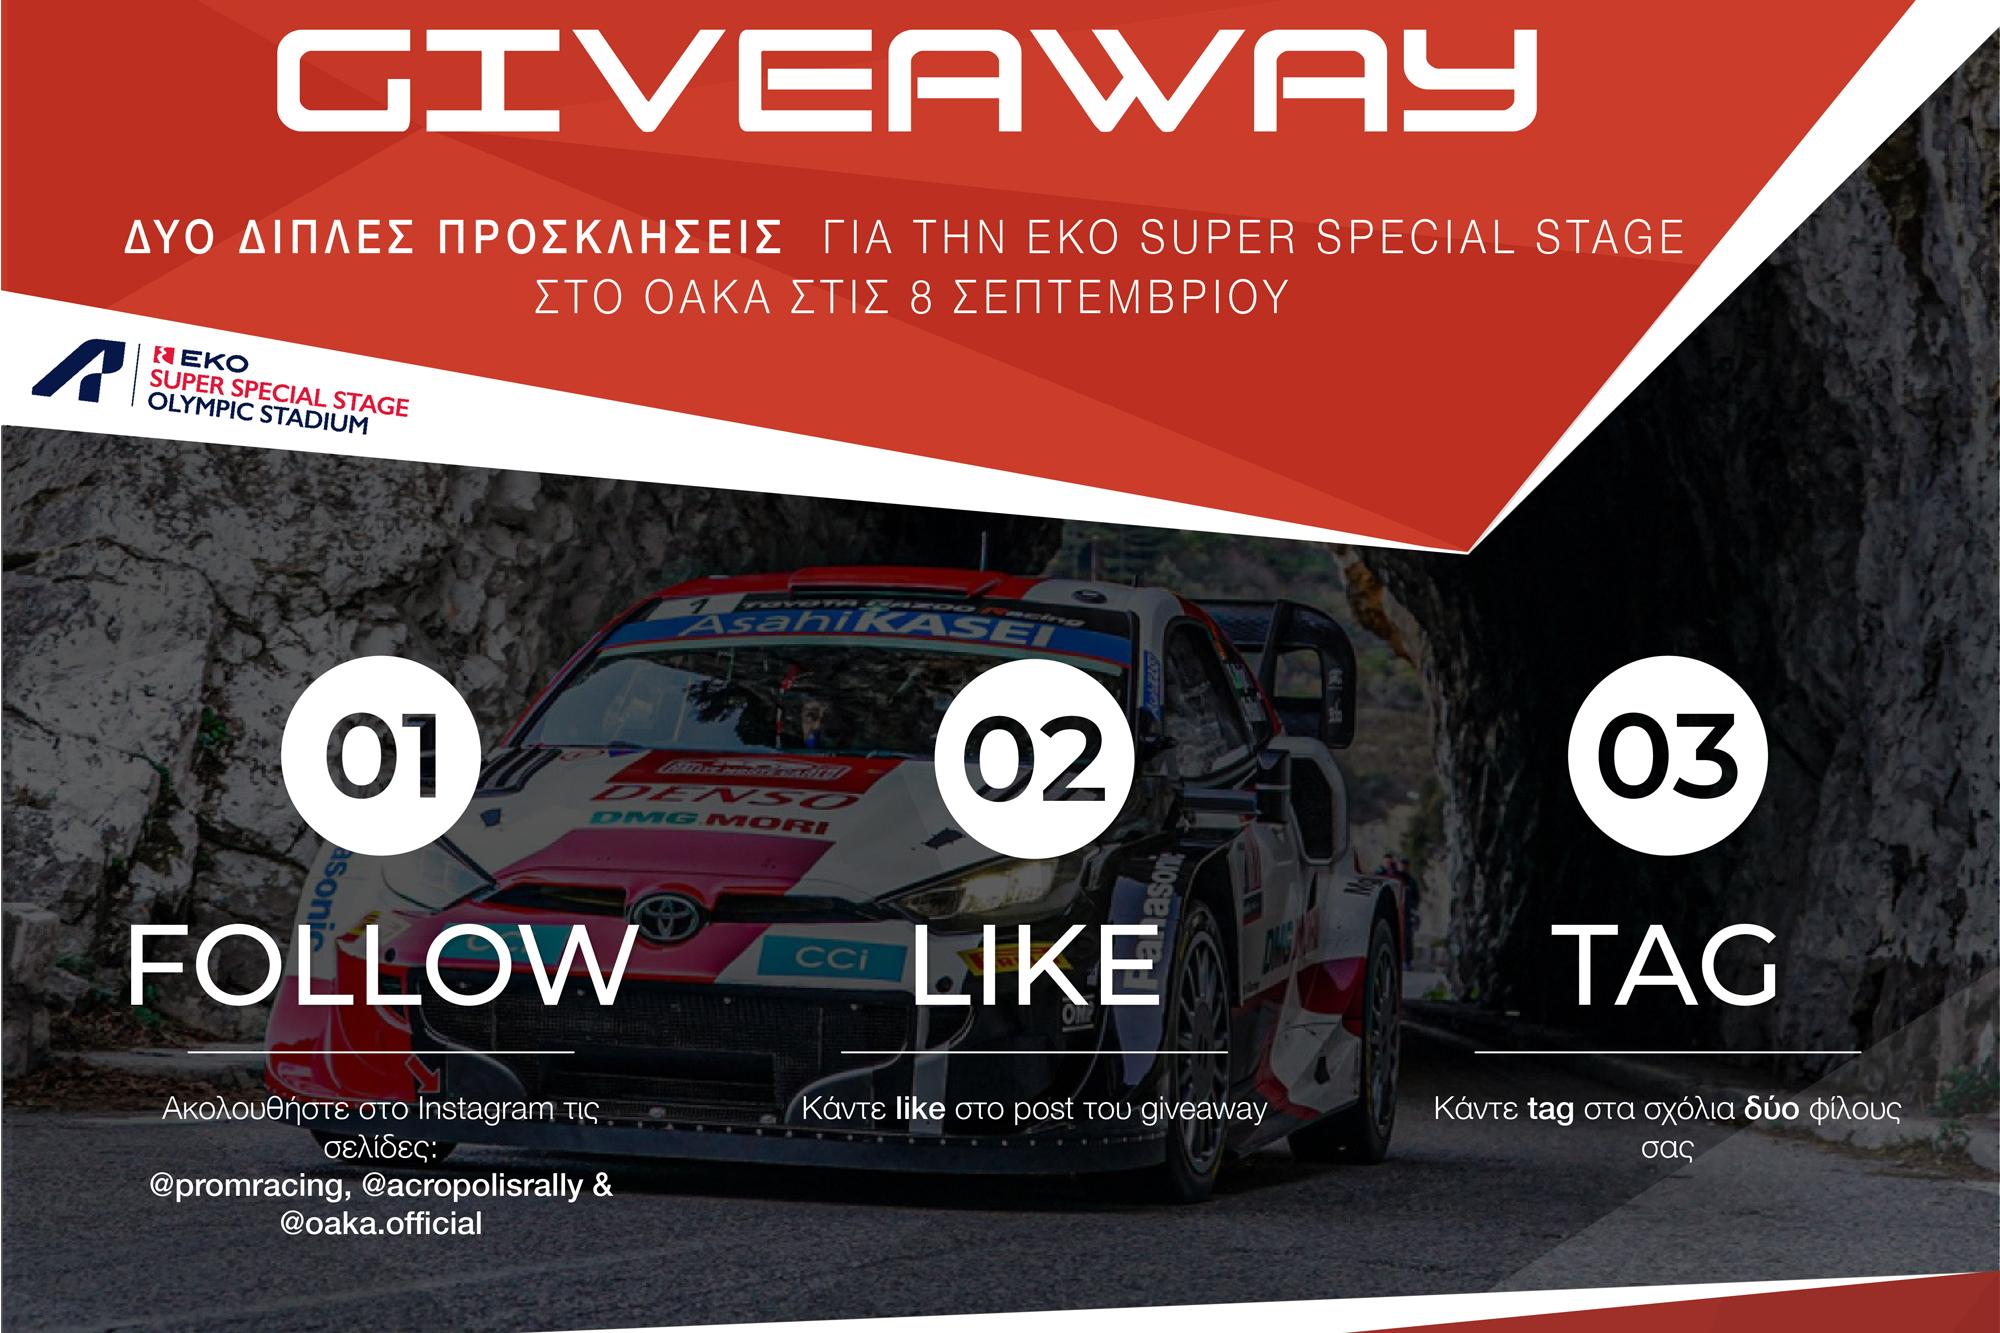 Prom Racing: Giveaway ΕΚΟ Super Special Stage